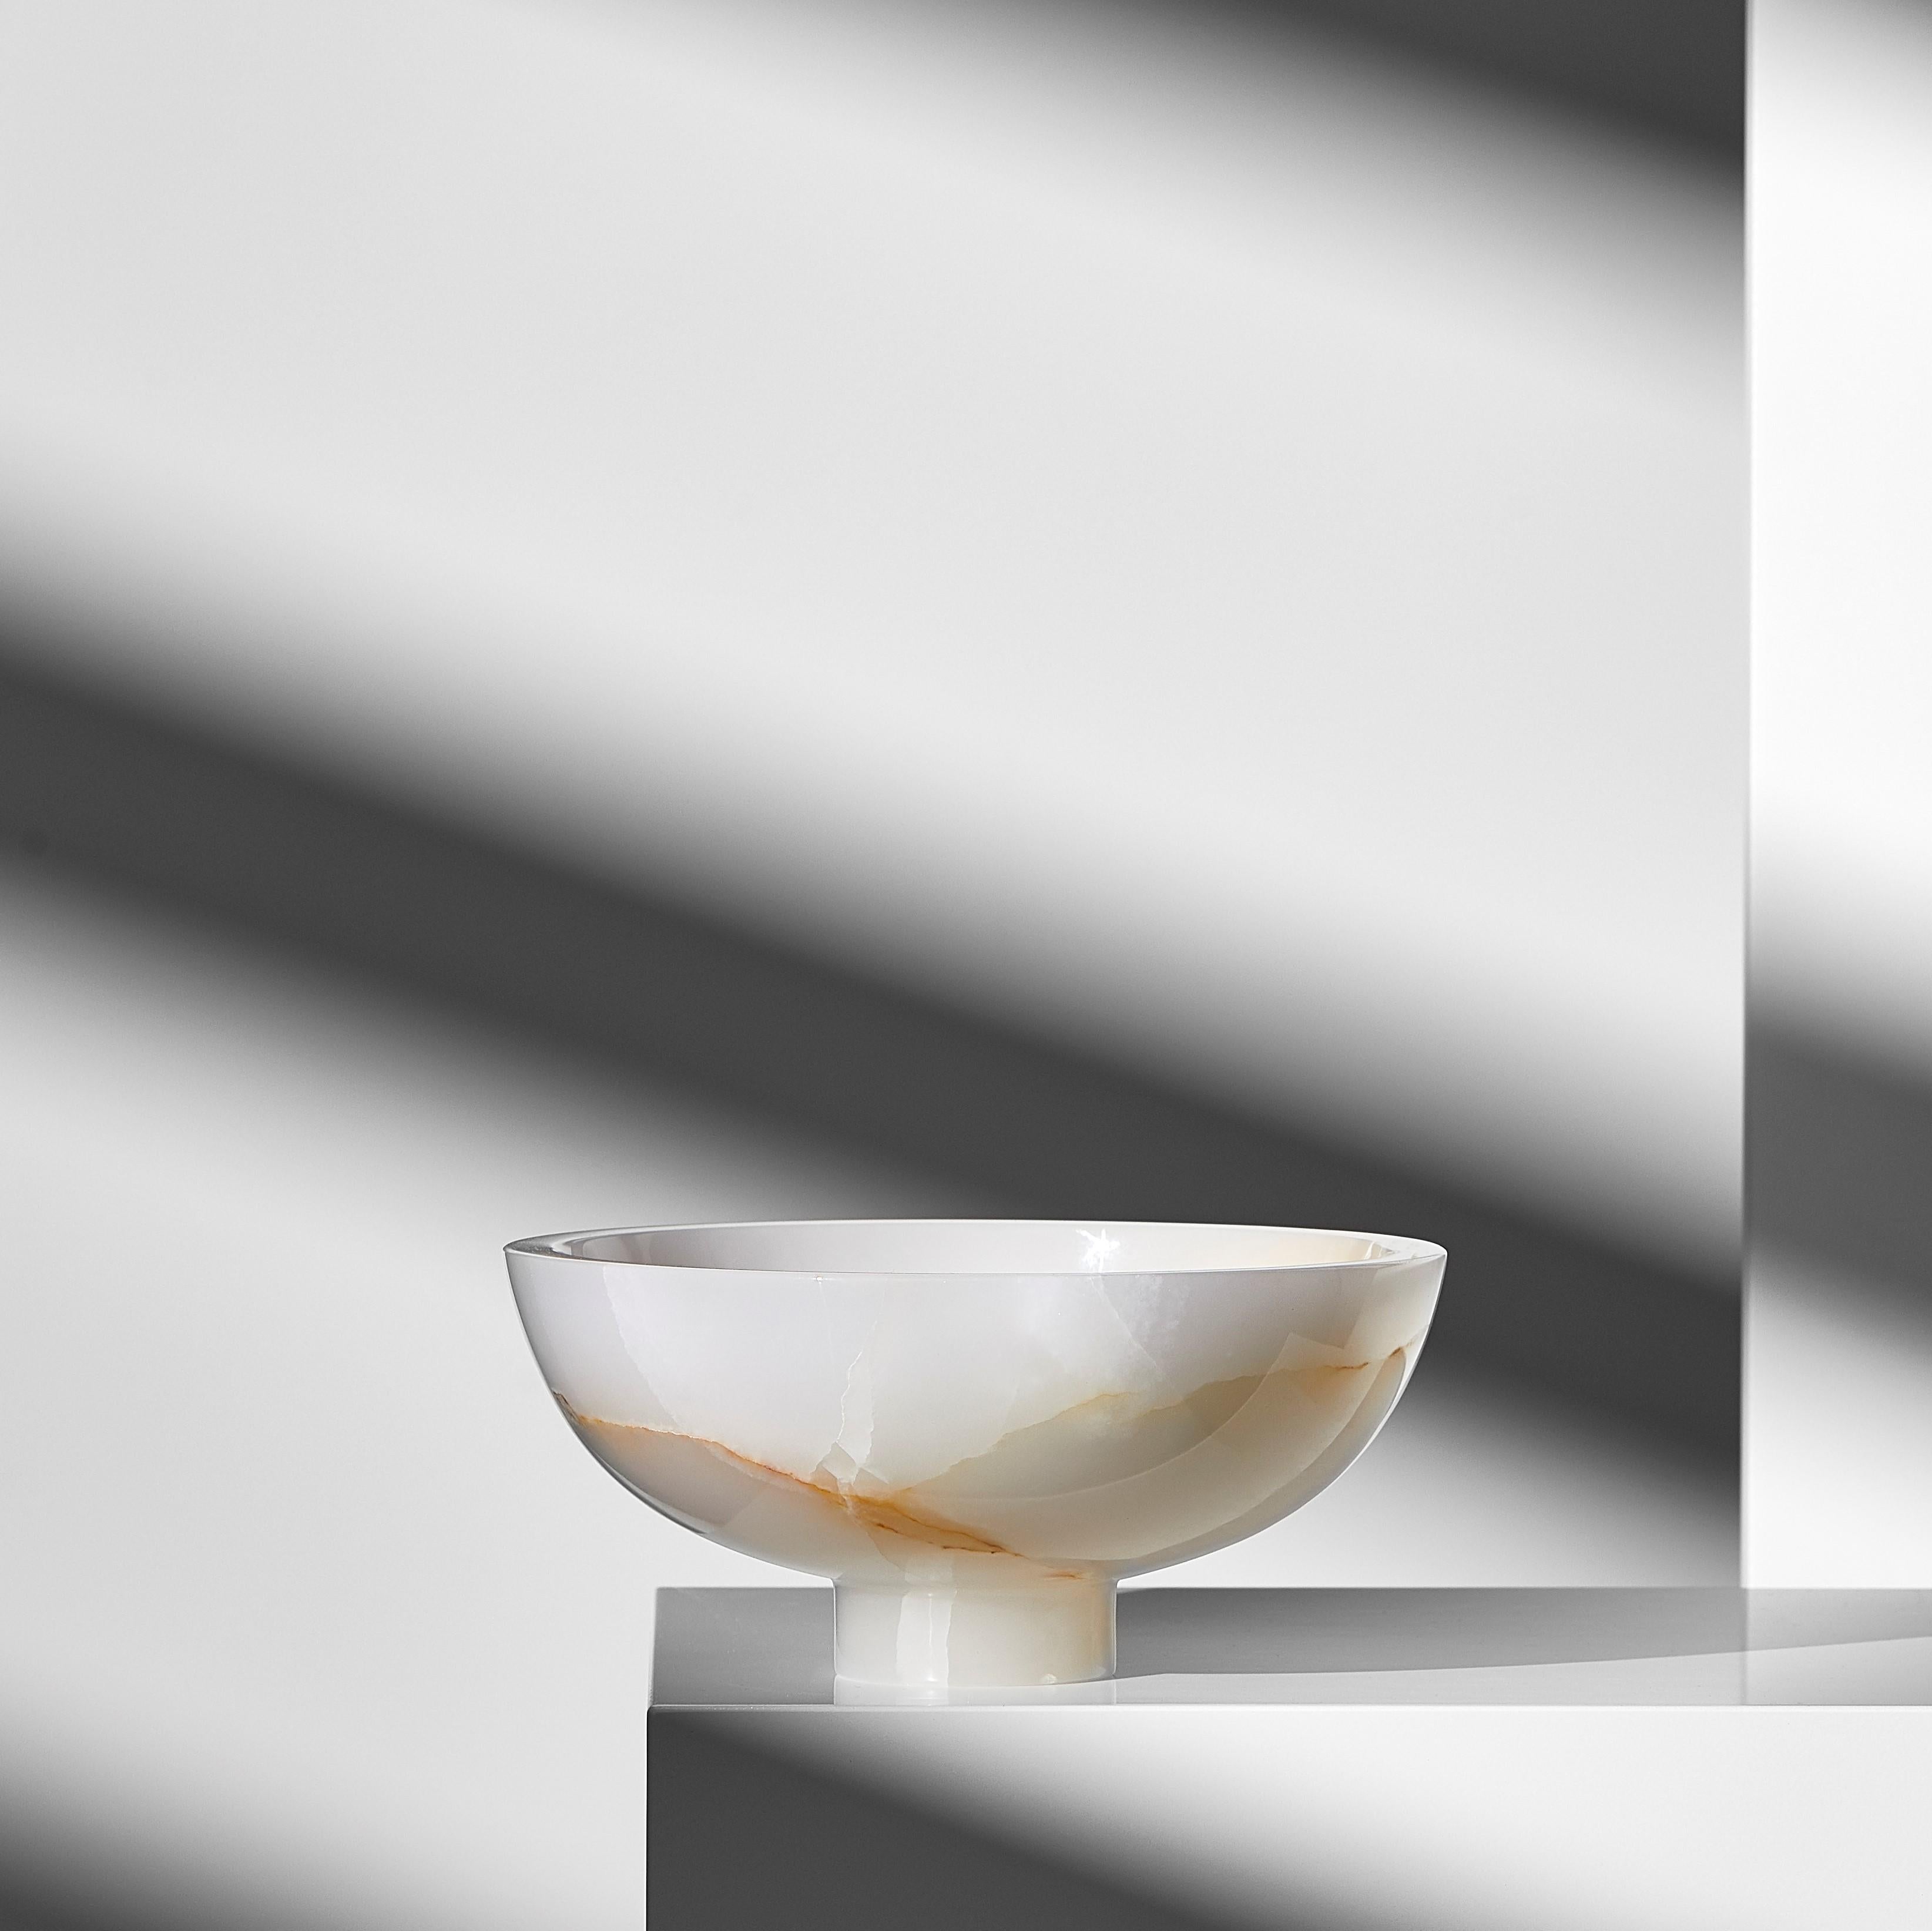 Set of 2 twosidestory bowl by Lisette Rützou
Dimensions: D 20 cm
Materials: Onyx

 Lisette Rützou’s design is motivated by an urge to articulate a story. Inspired by the beauty of materials, form and architecture, each design is an independent